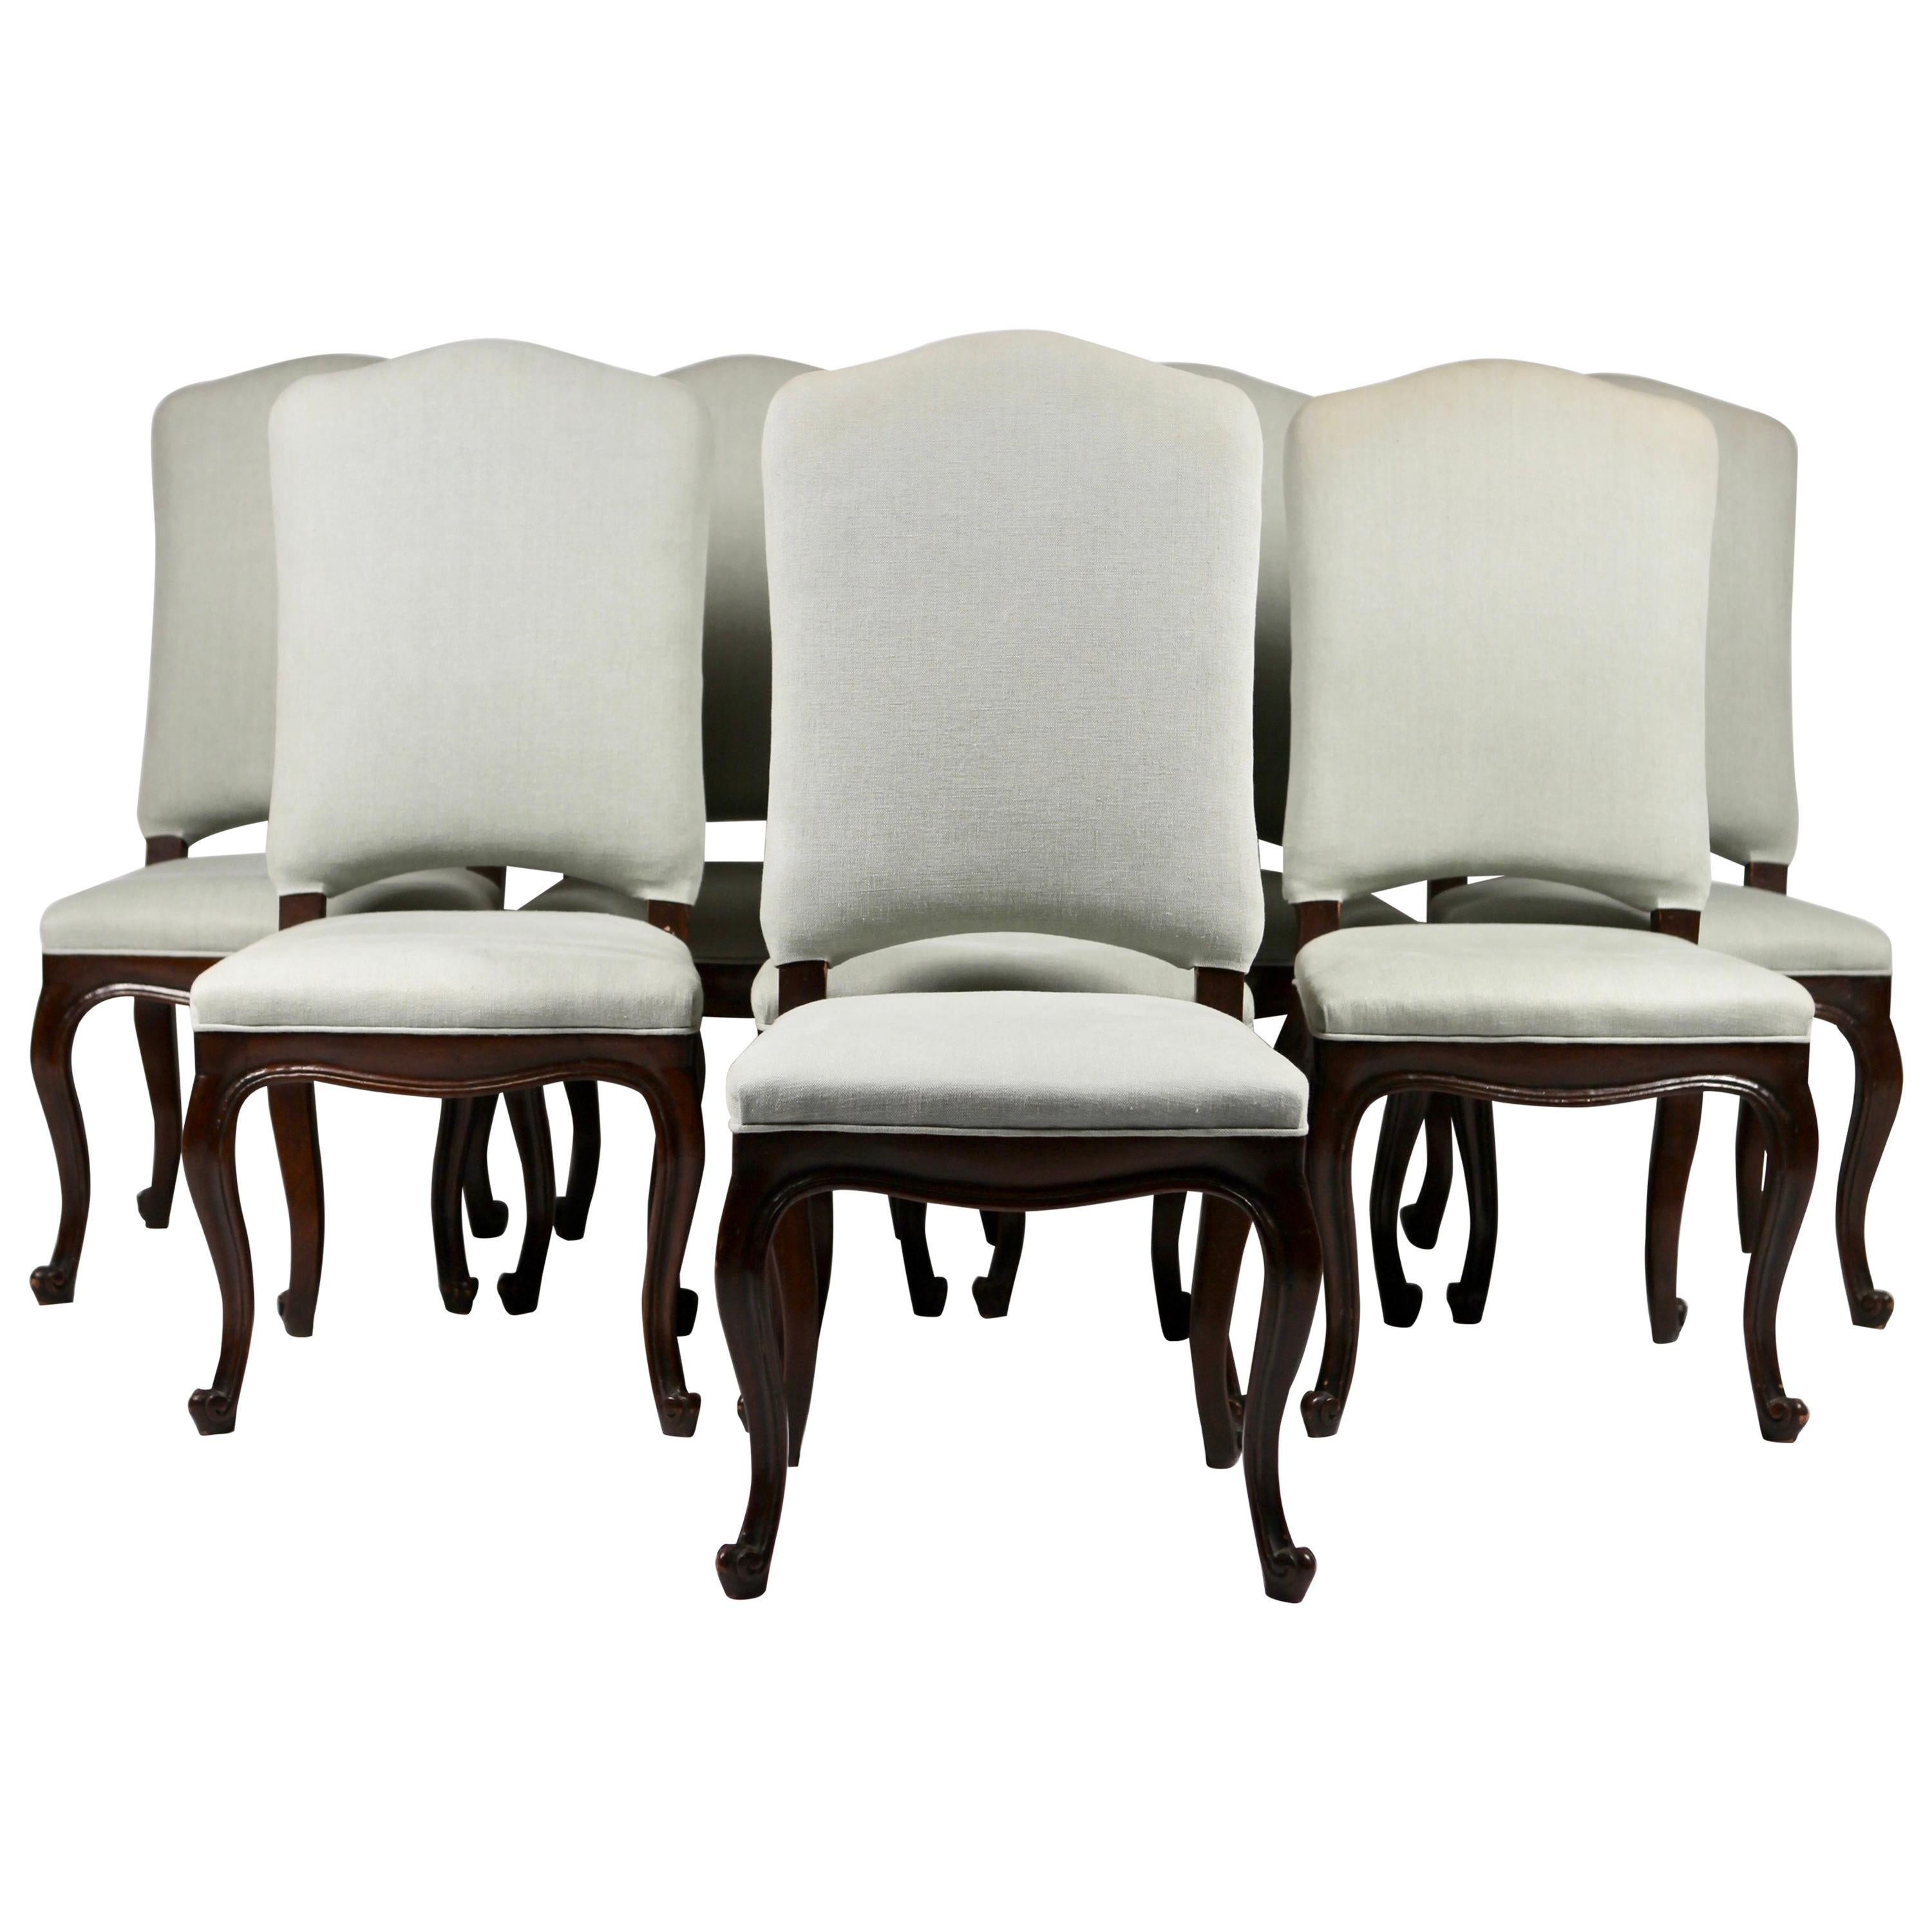 Set of 8 Italian Louis XV Style Dining Chairs, 19th Century